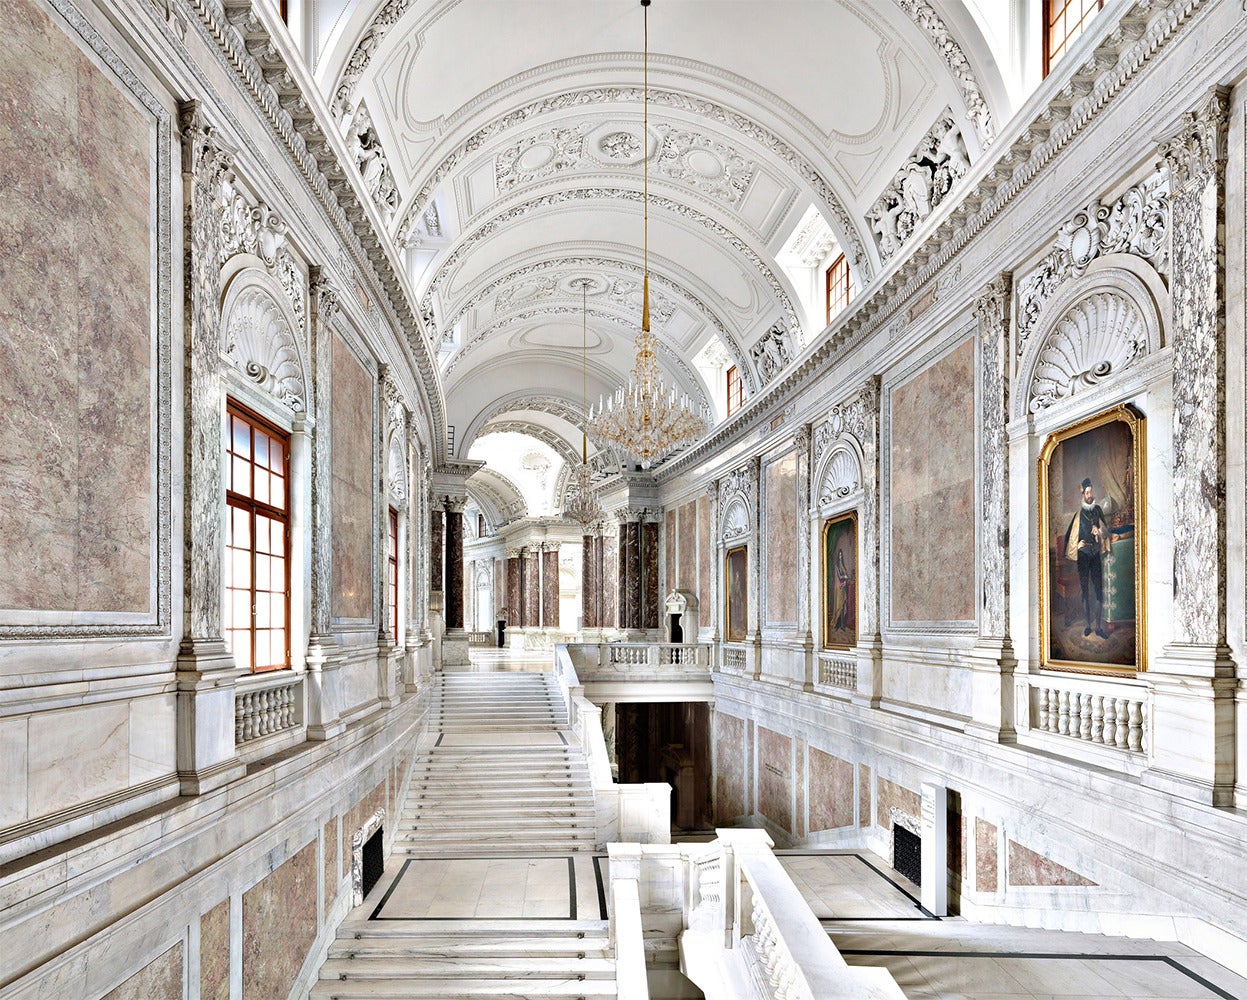 Kunsthistorisches Museum Wien, Neue Burg, Vienna 2014
C print
Signed and numbered edition of 5
Mounted and framed

The photographer is based in Florence, and is fascinated how his architectural subject matter allows him to control the composition of